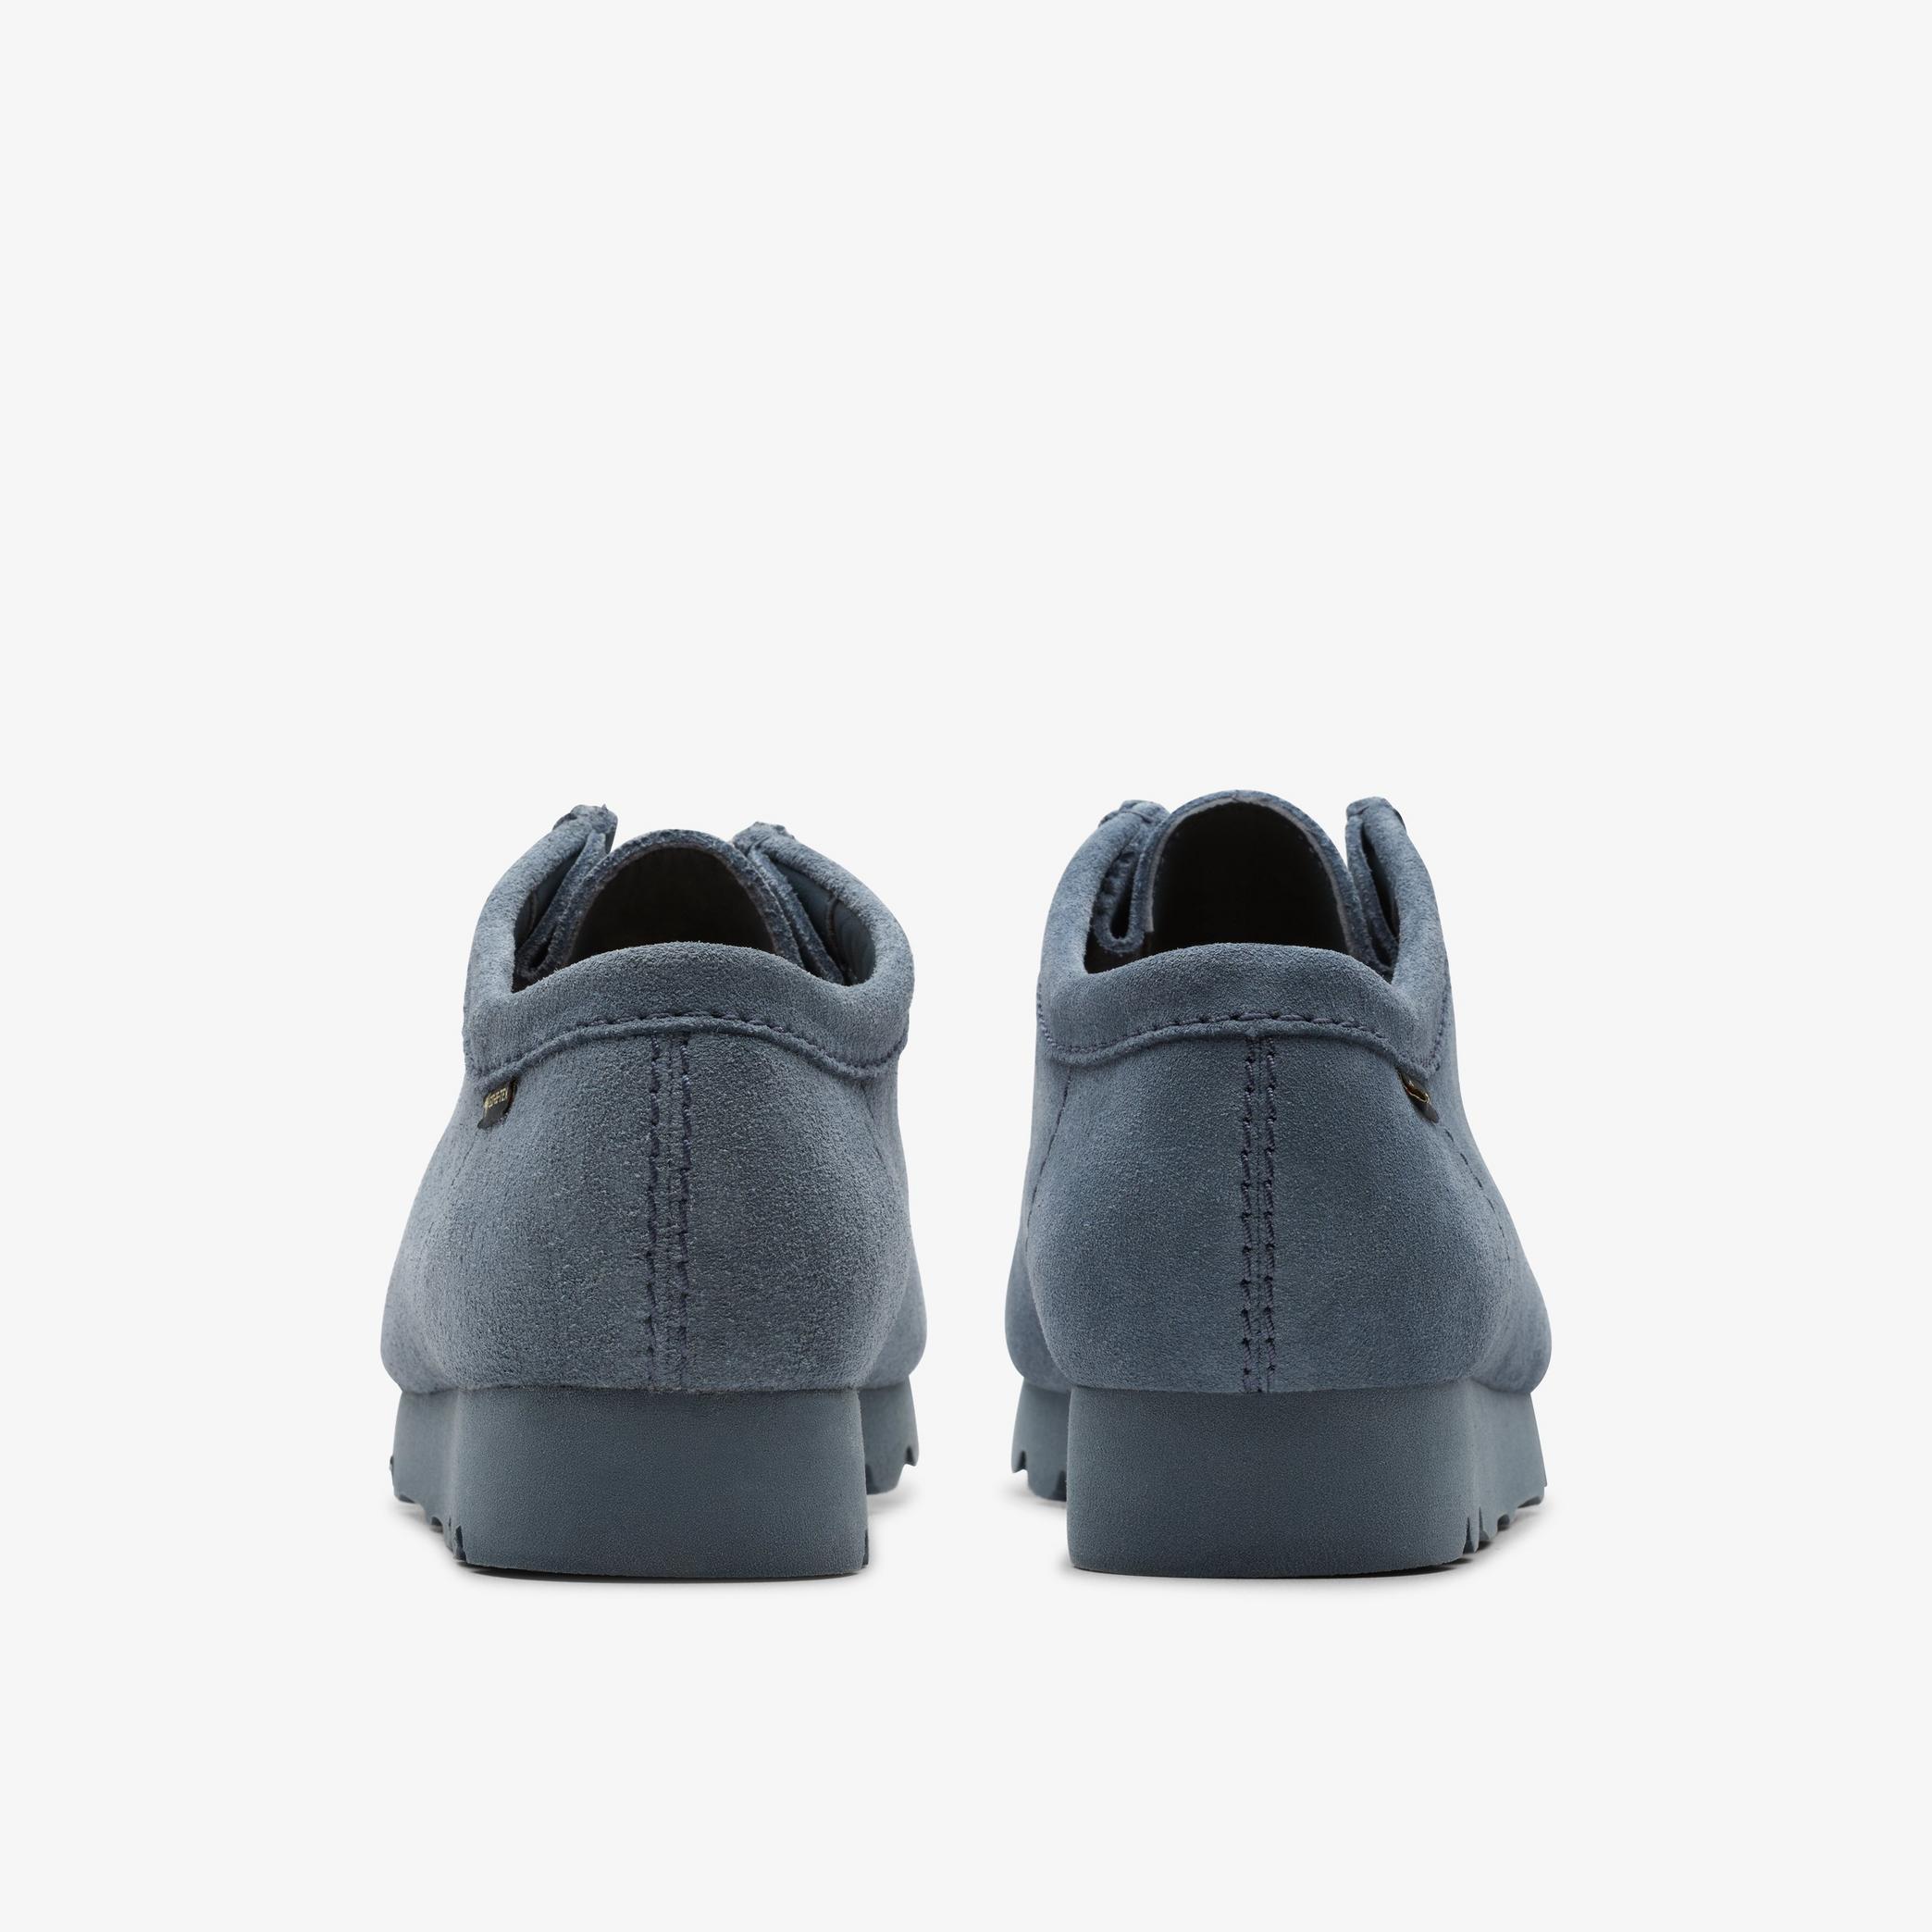 Wallabee GORE-TEX Blue/Grey Suede Shoes, view 5 of 7